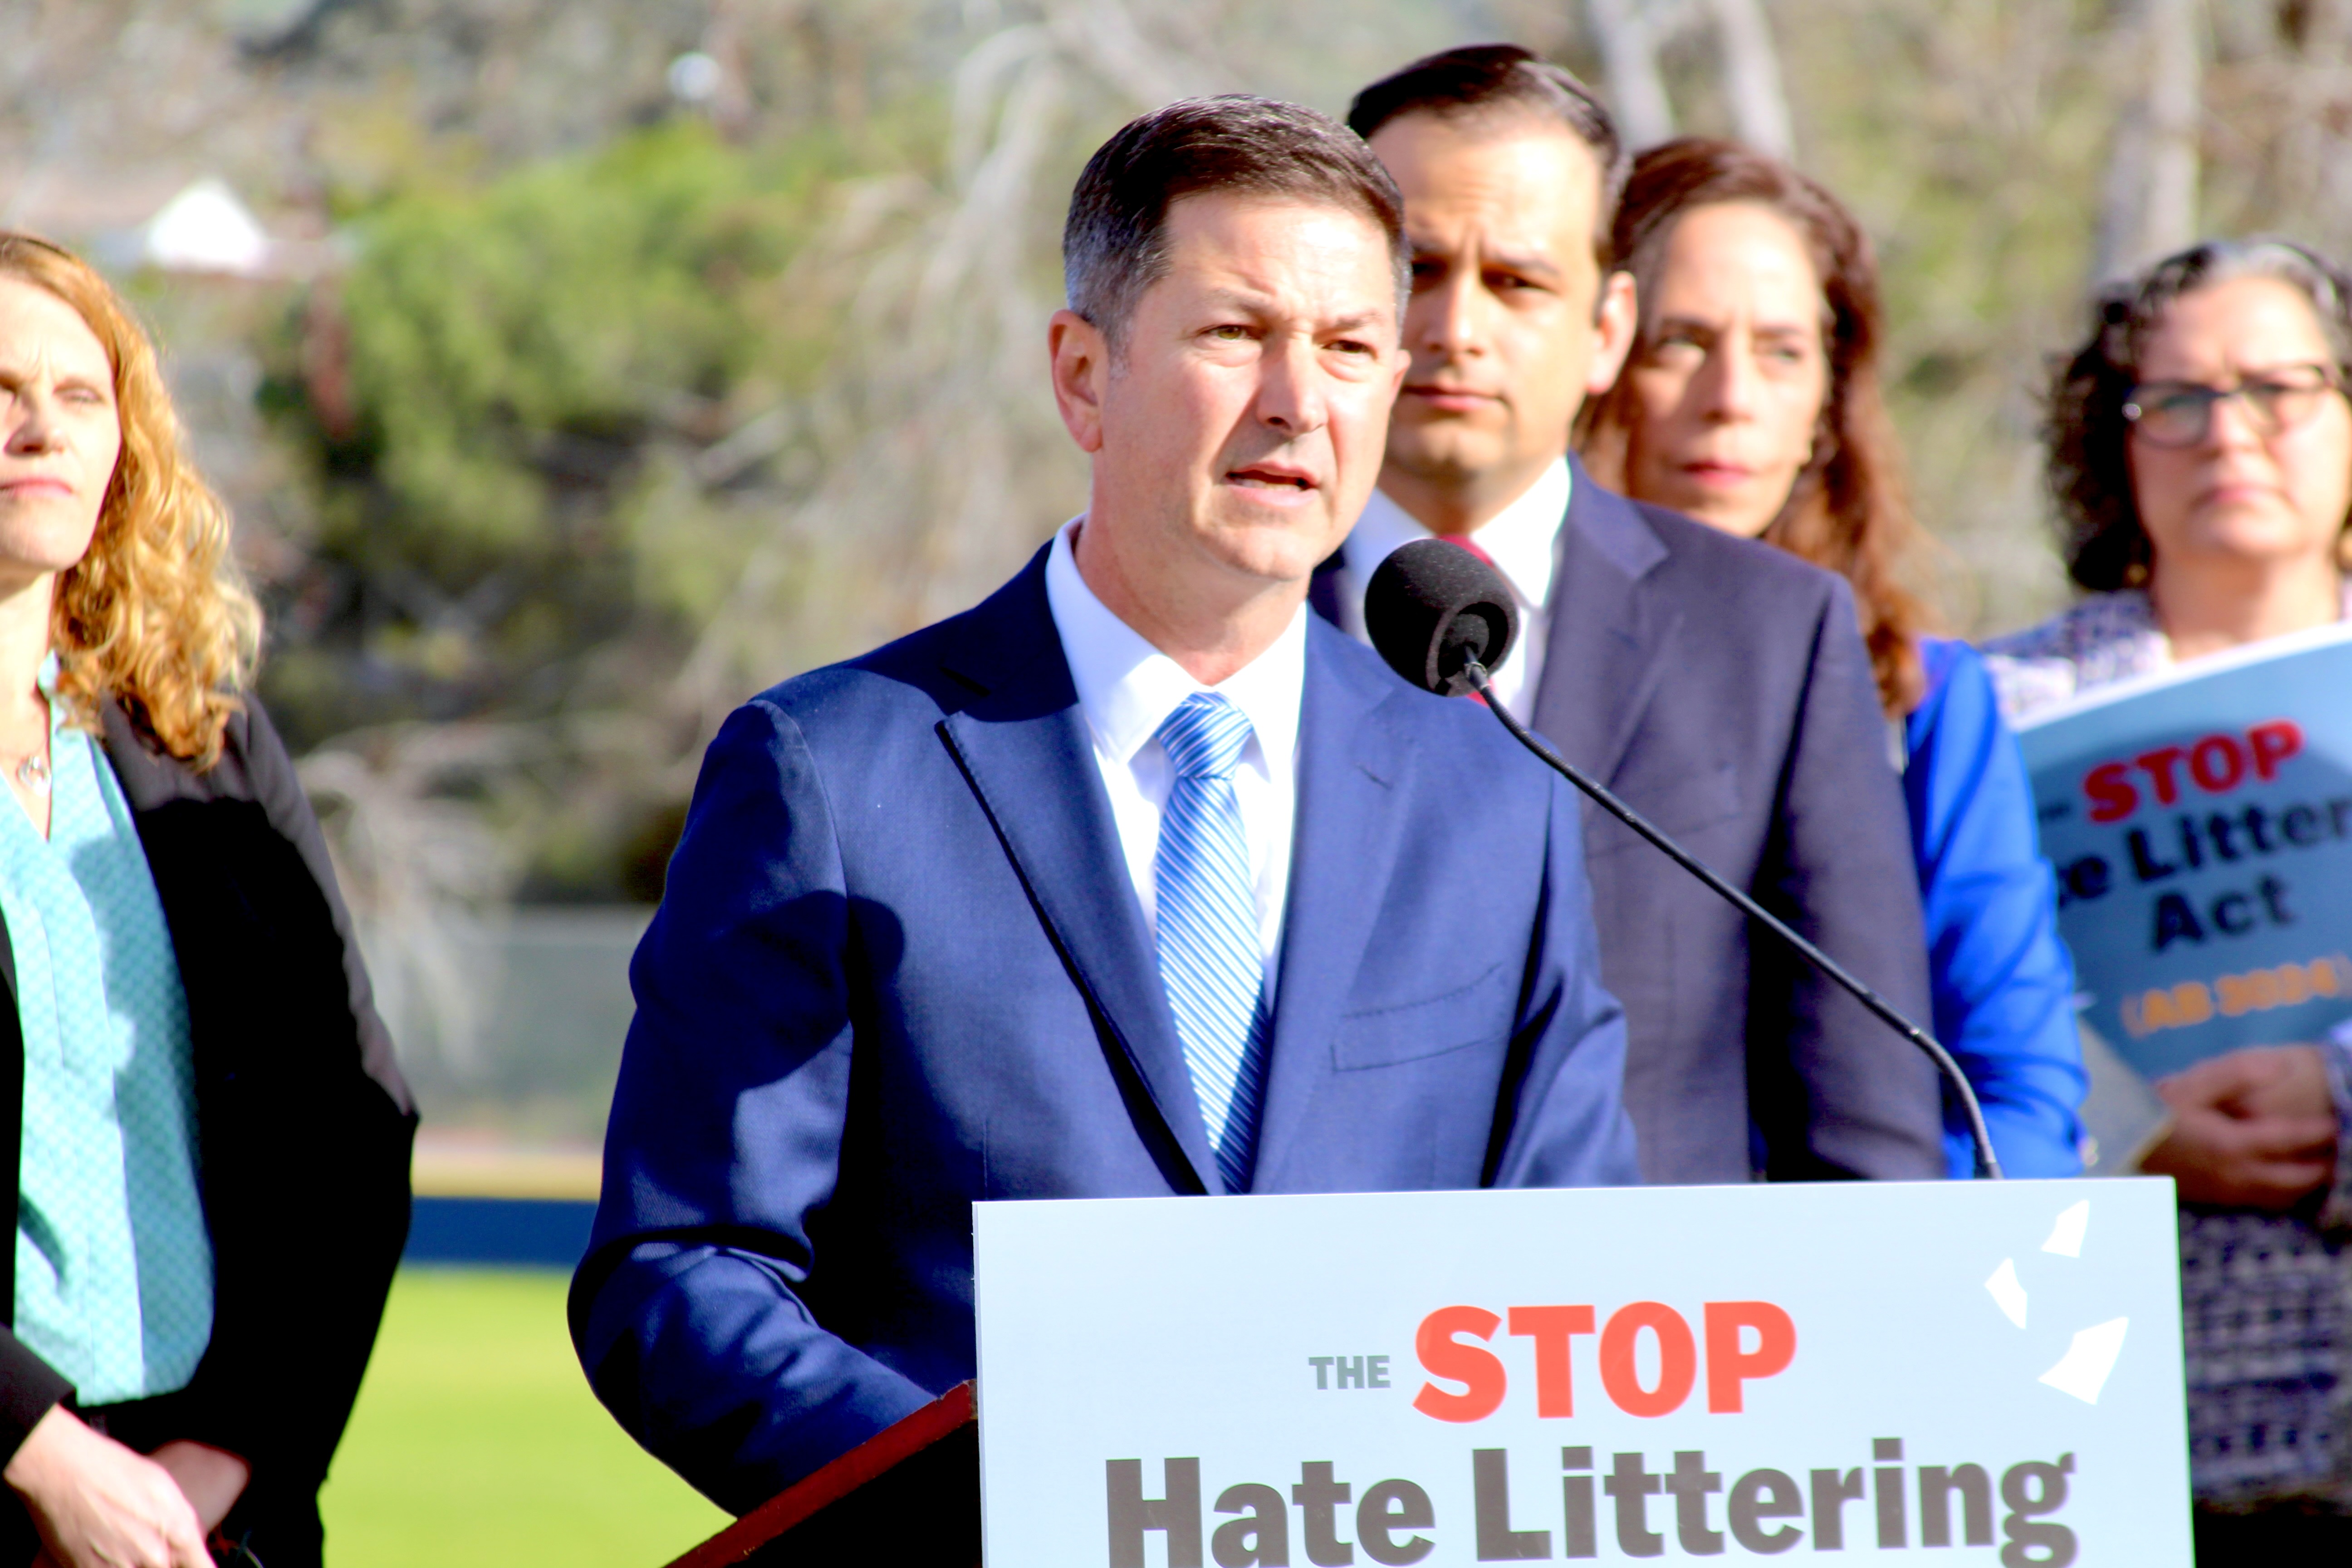 San Diego Political Leaders Announce AB 3024: New Legislation to Curb Hate Littering in California